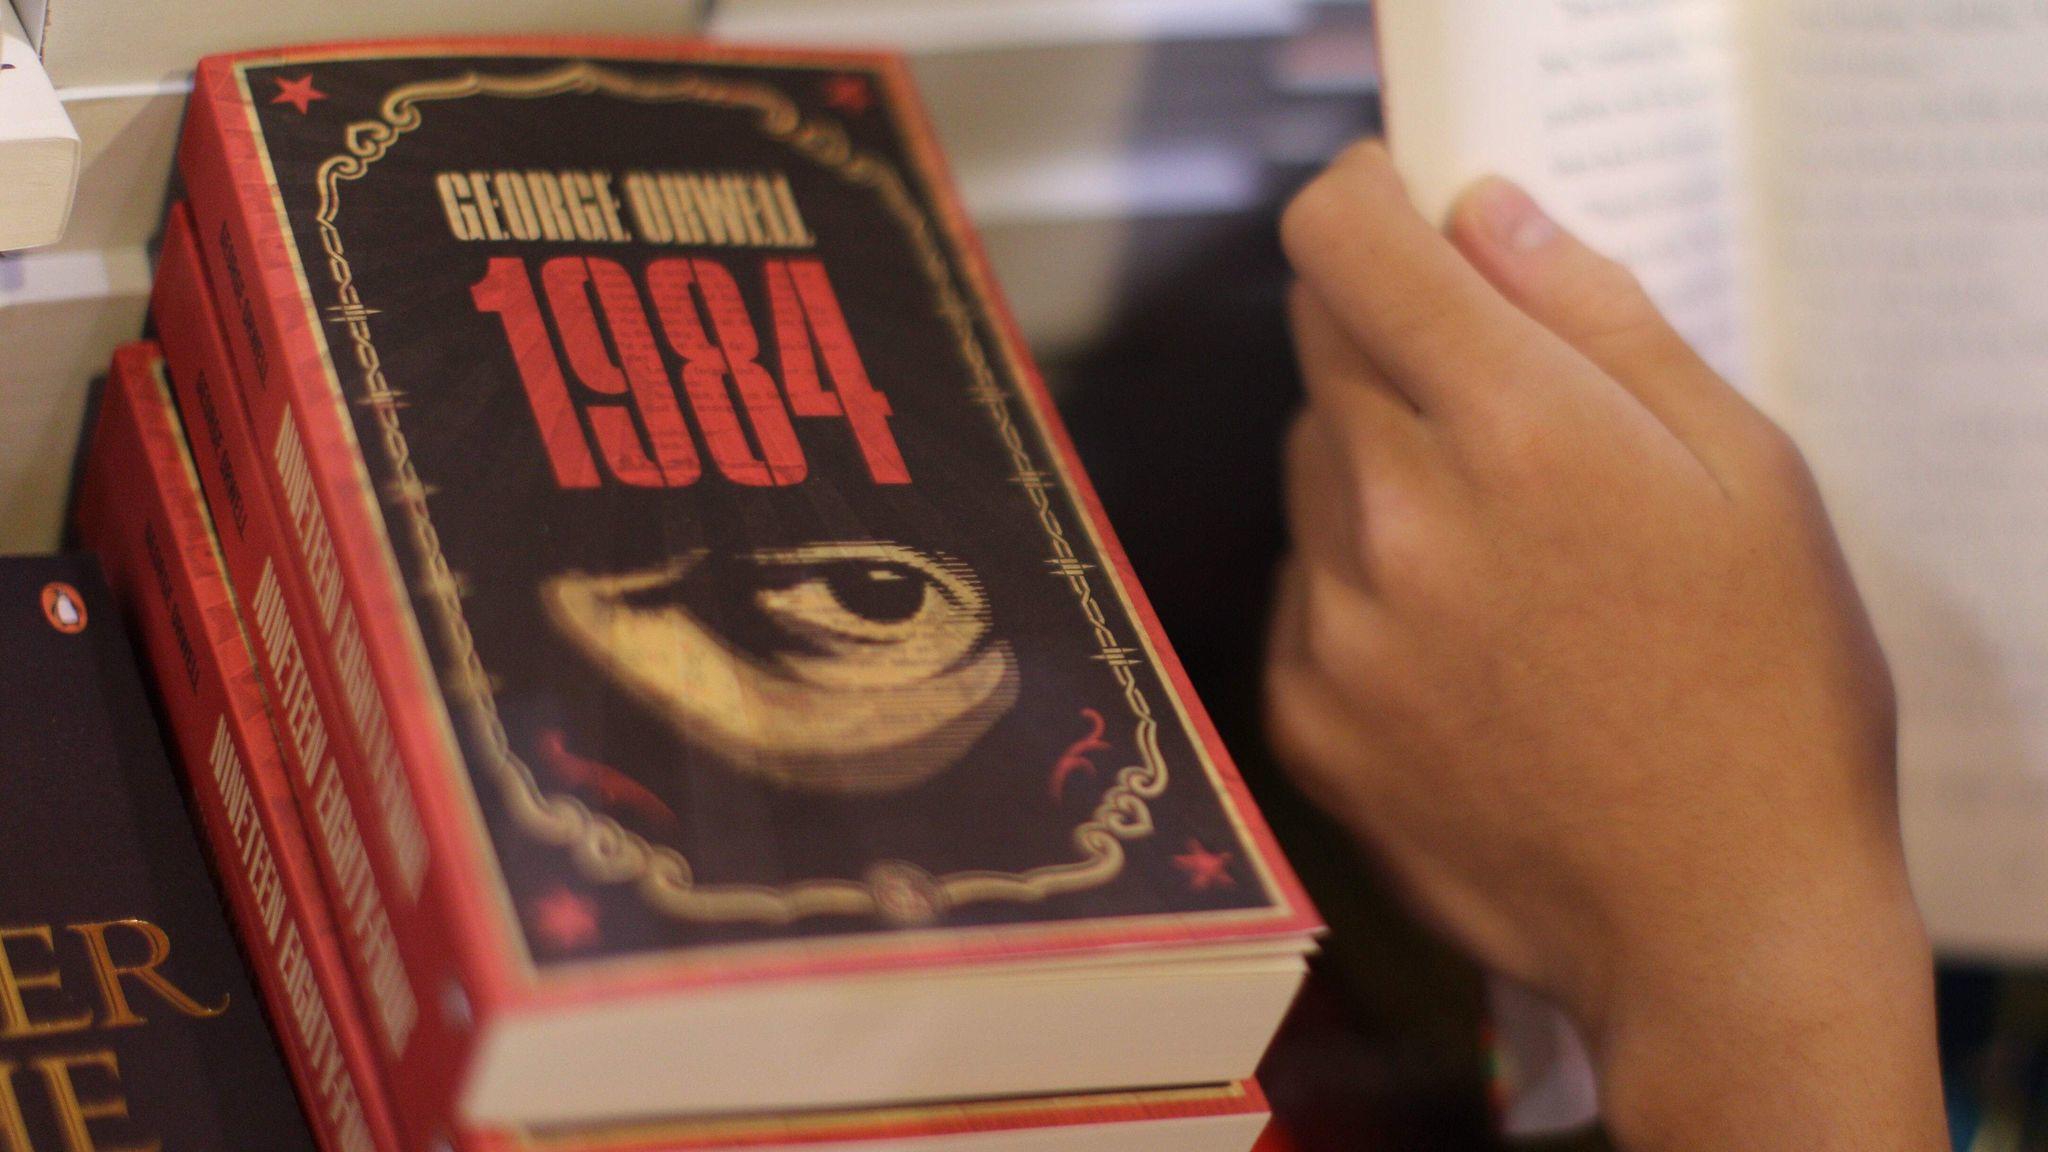 George Orwell's "1984" is in high demand.